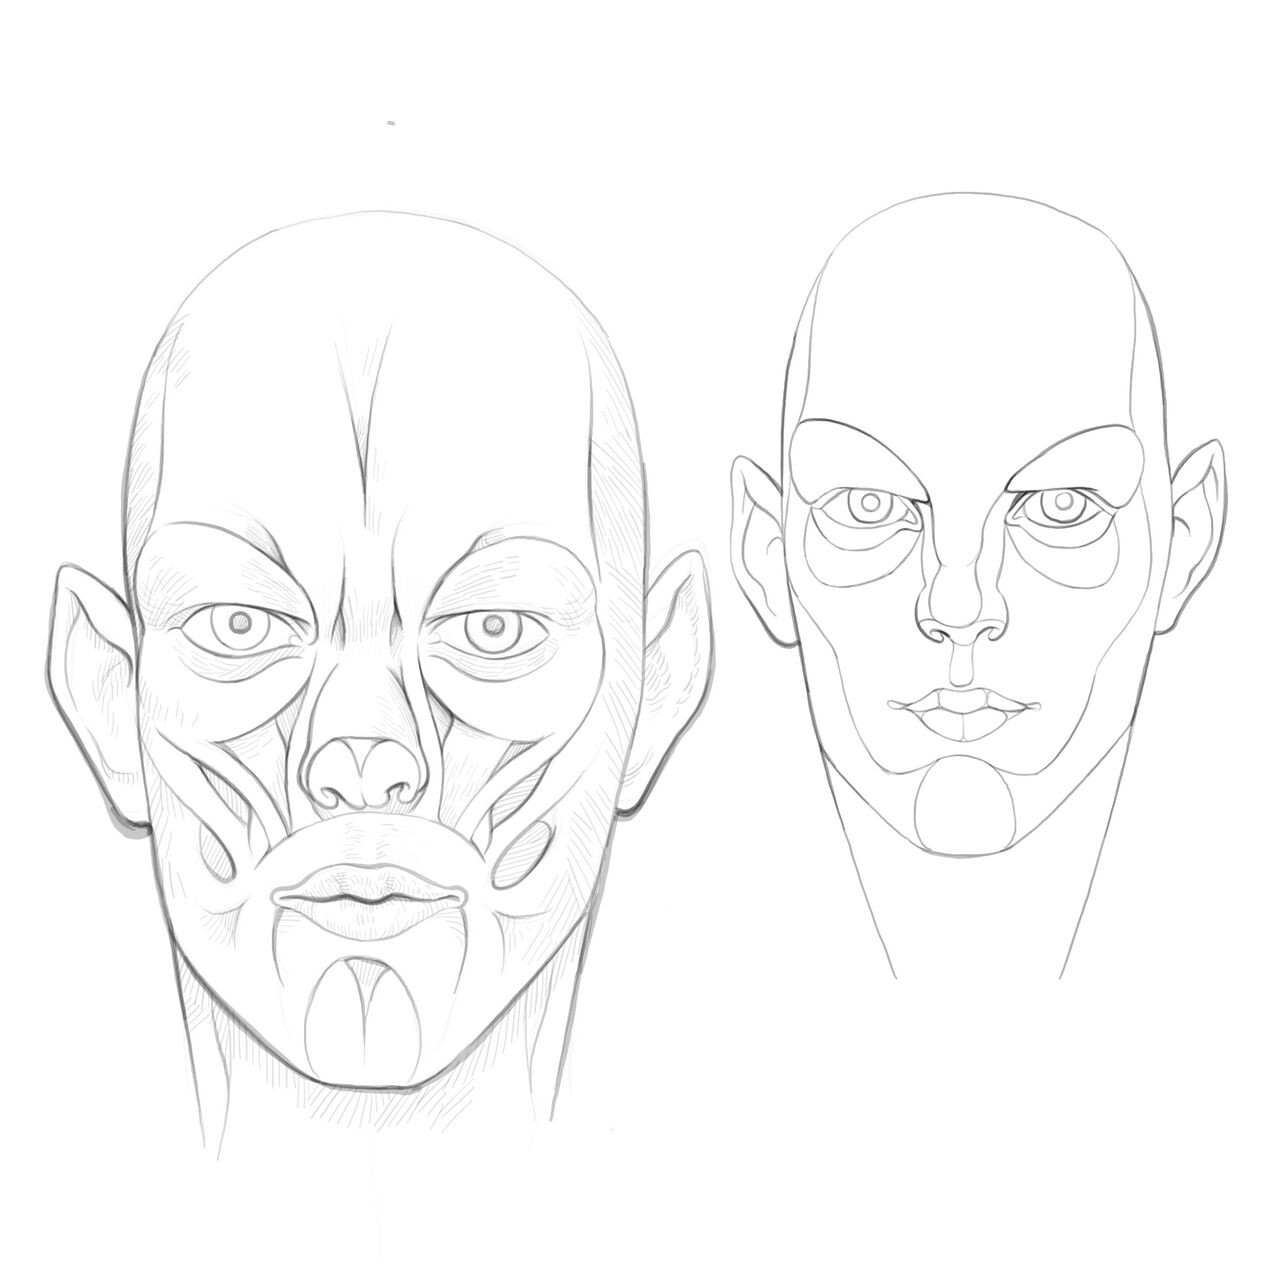 Trying to remember the muscles of the face. 